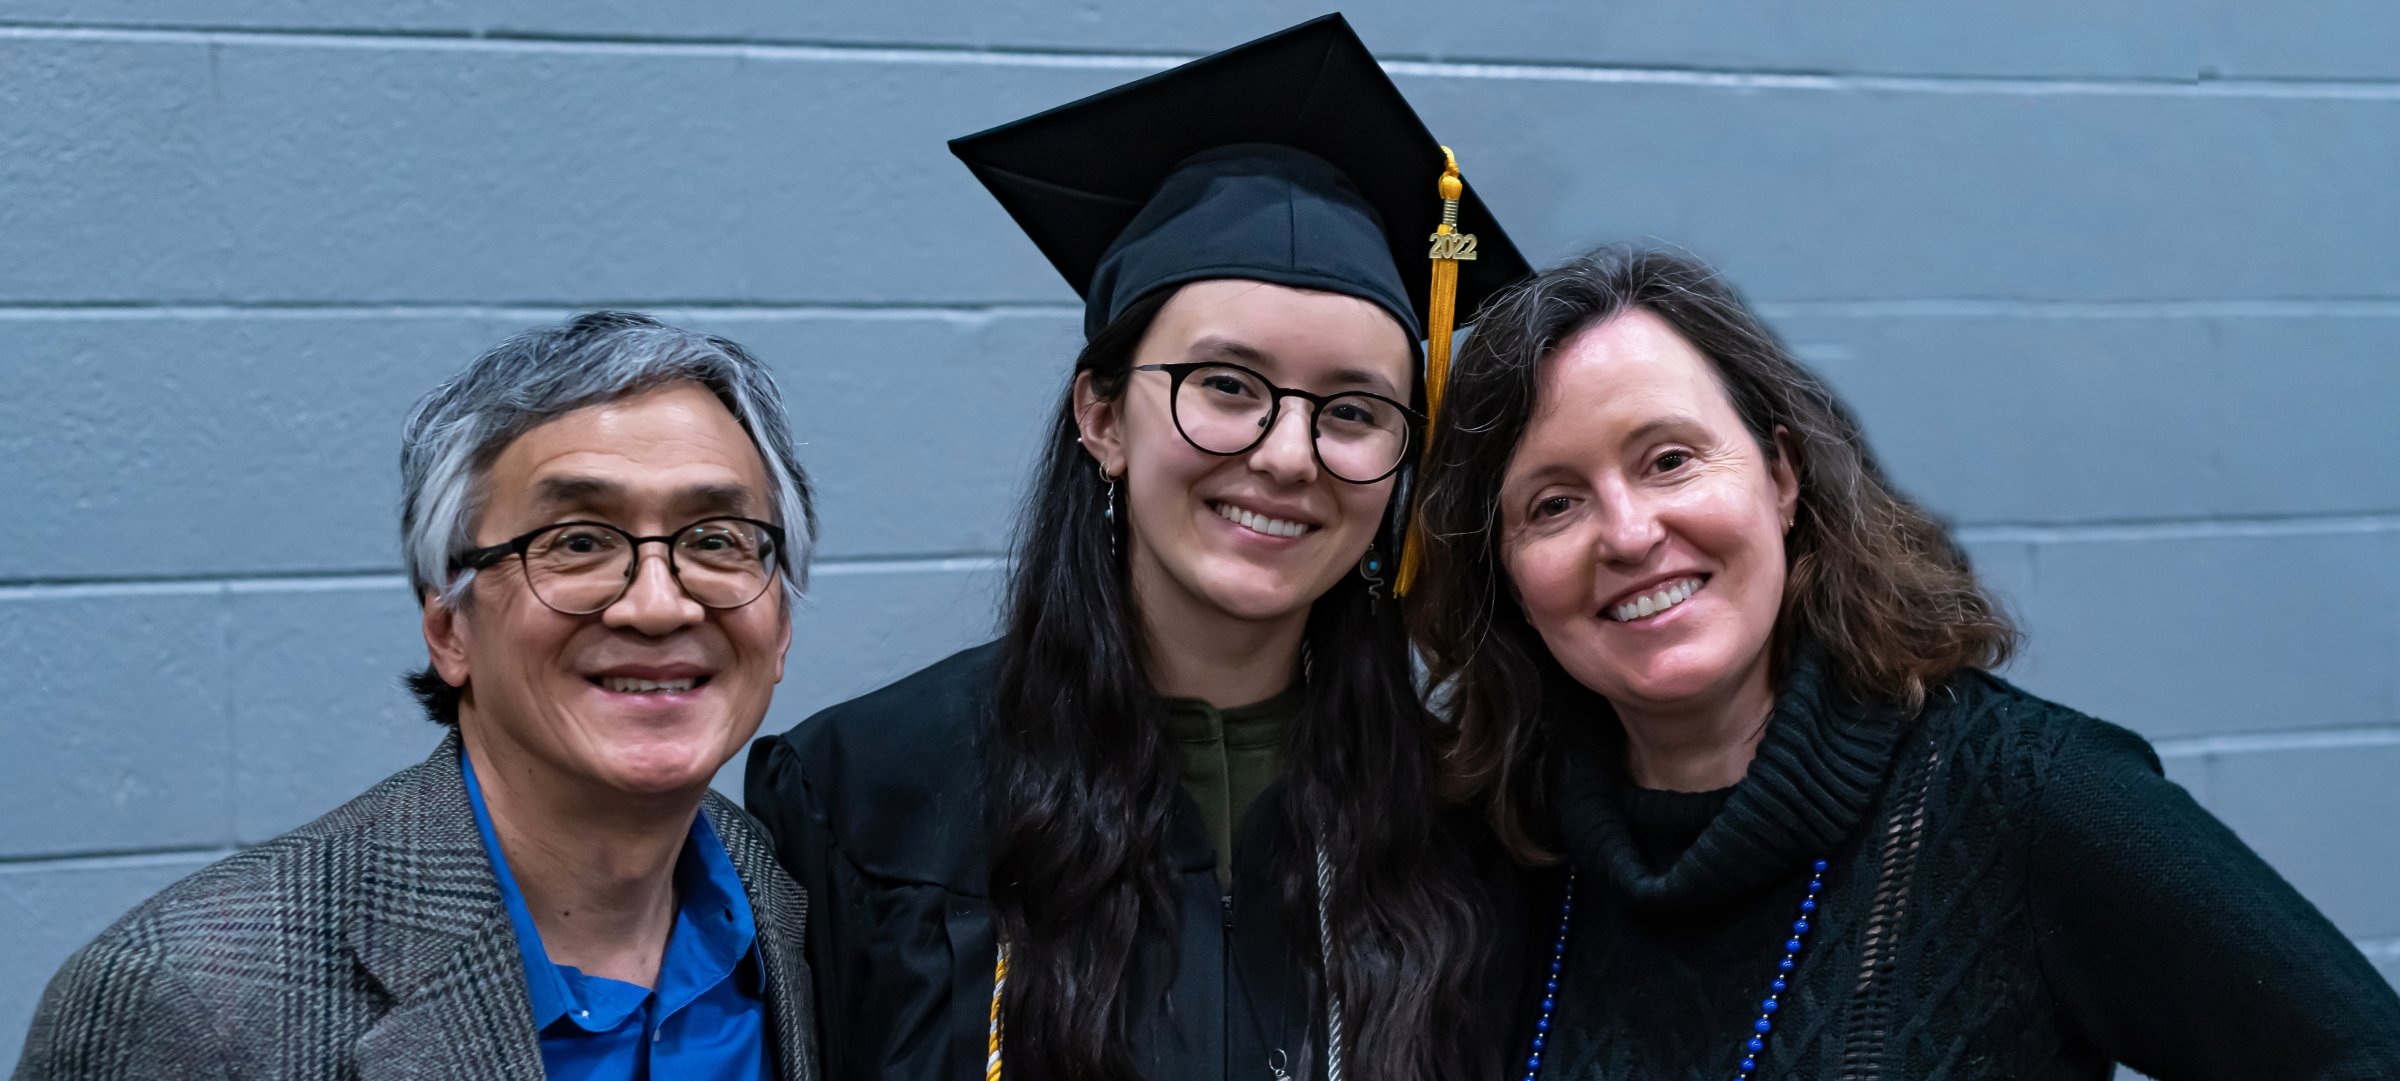 Student with family at commencement.